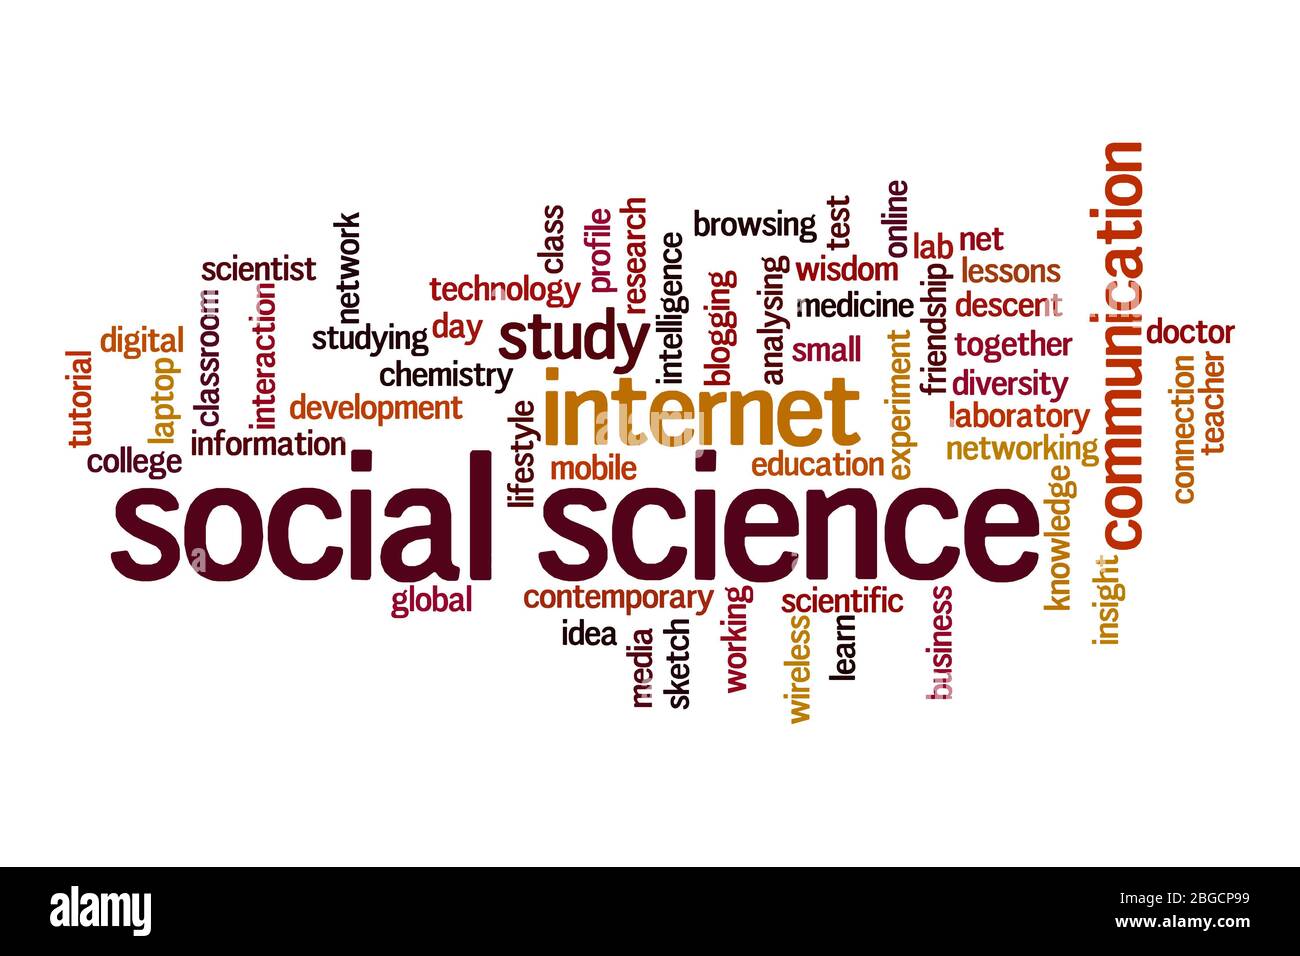 Social science word cloud concept on white background Stock Photo - Alamy